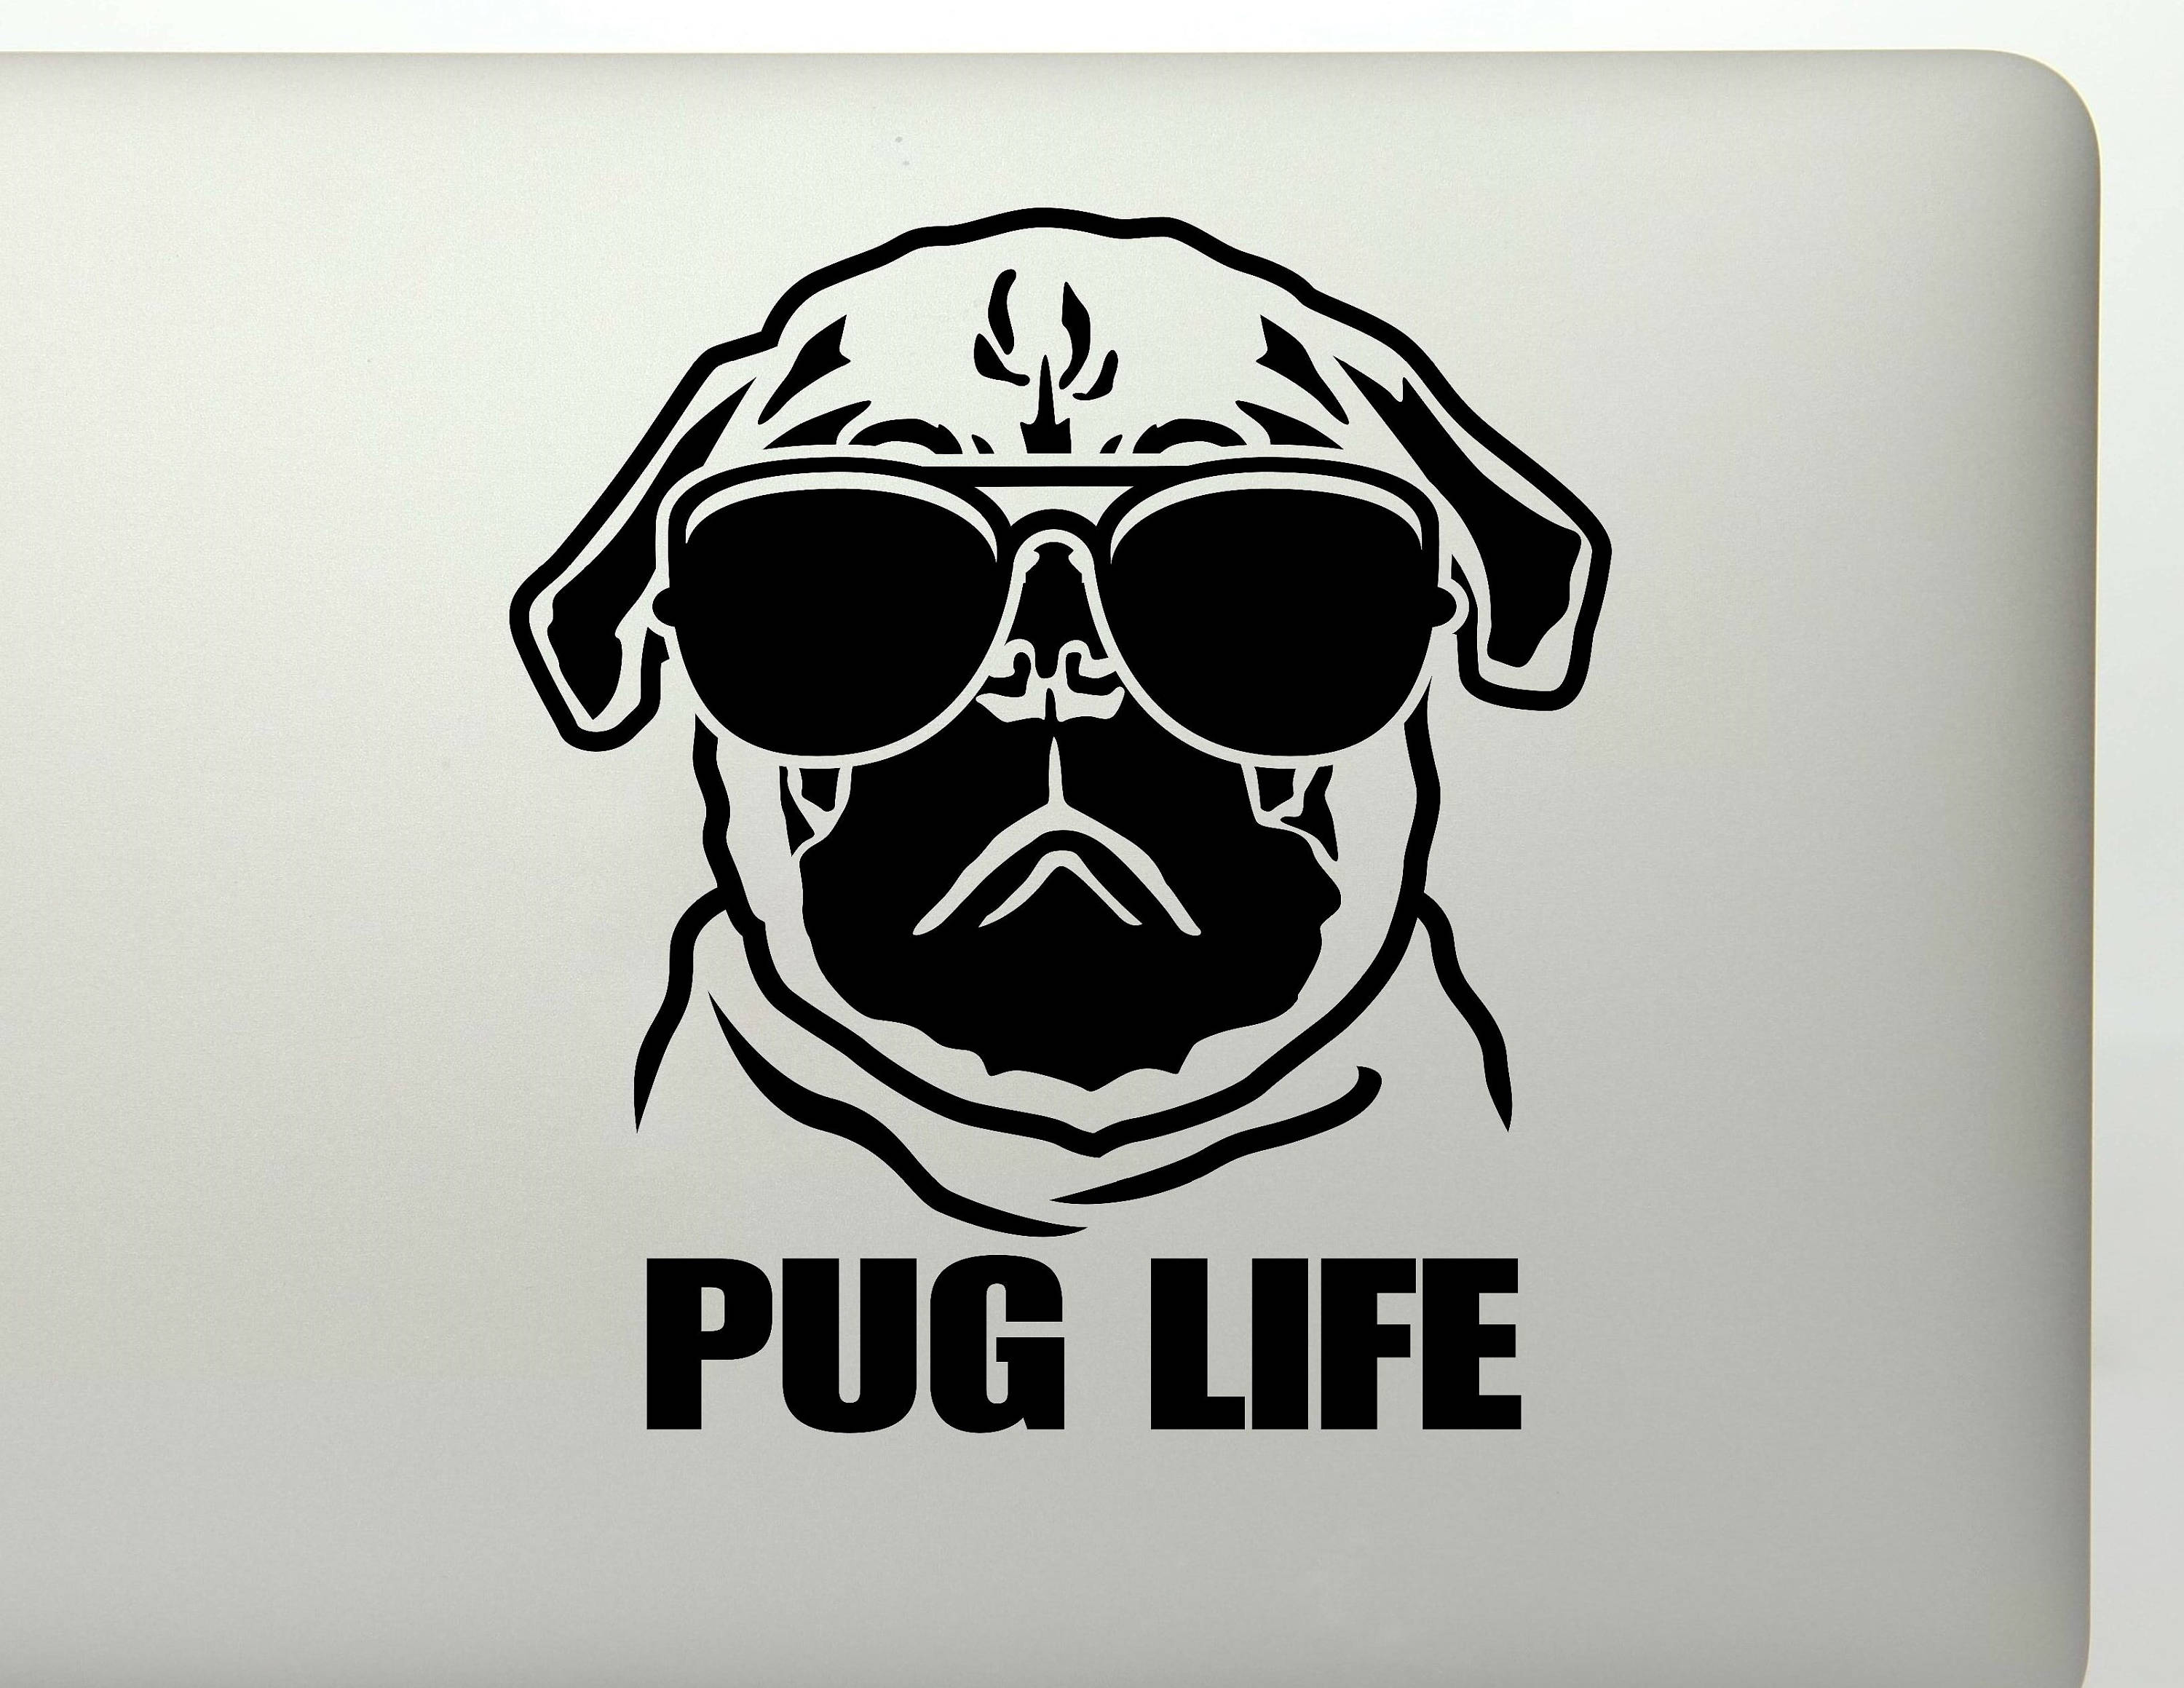 Pug Life die cut vinyl decal sticker for cars laptops